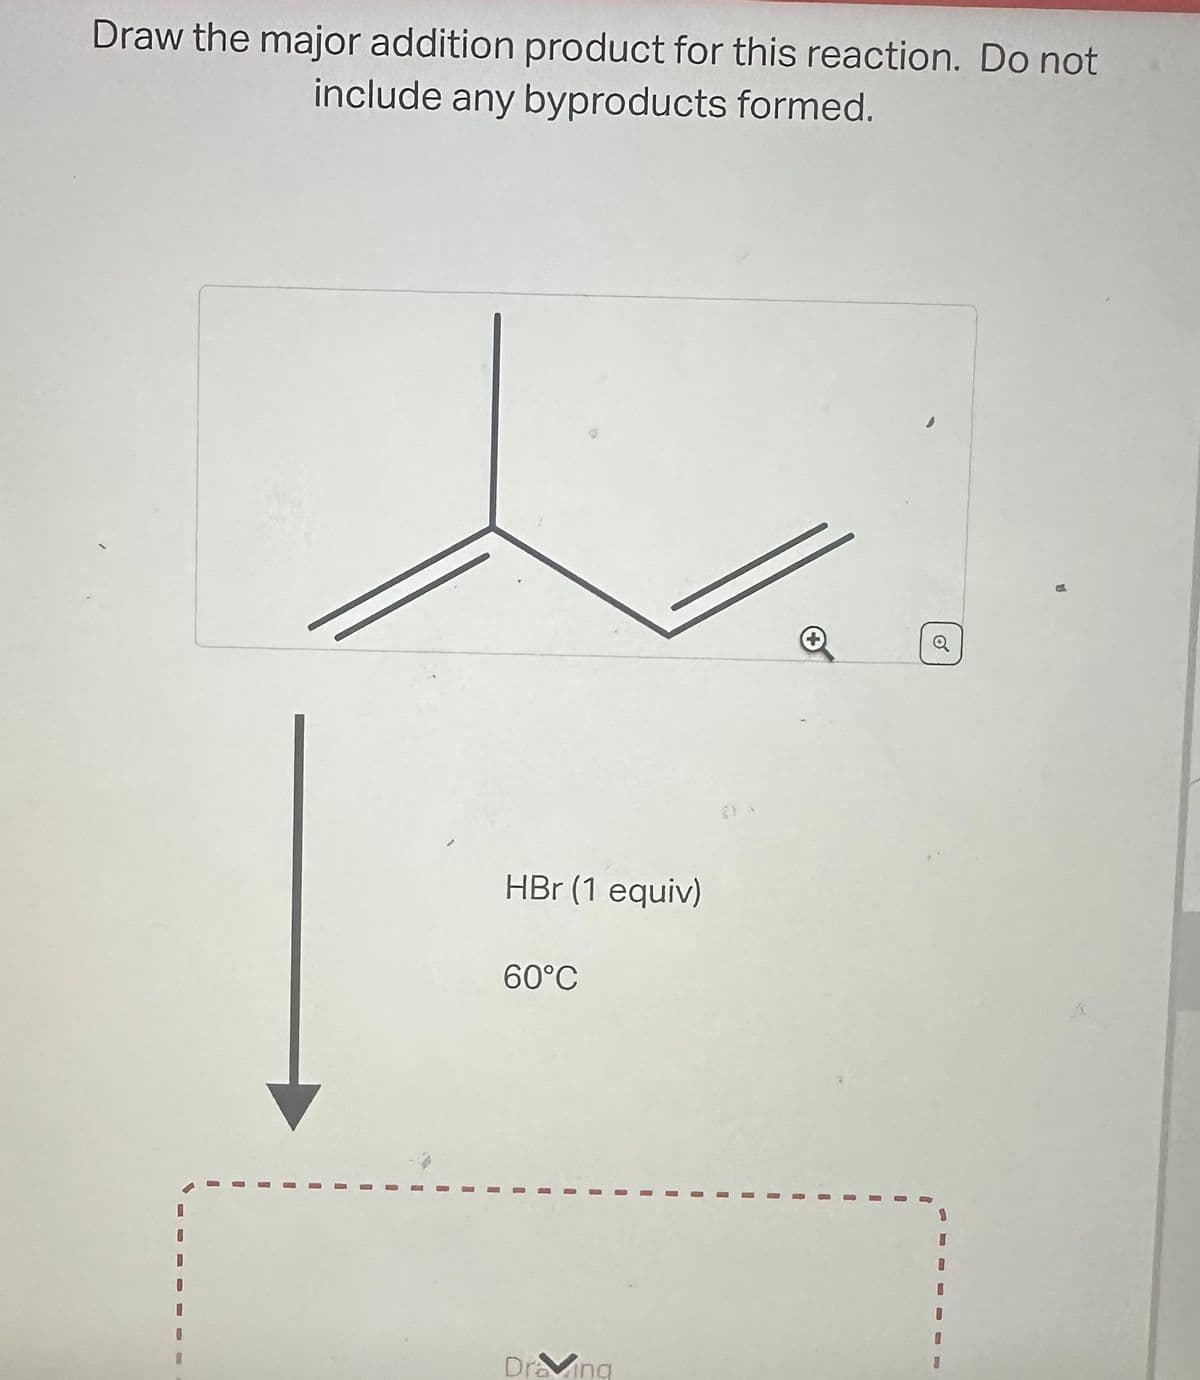 Draw the major addition product for this reaction. Do not
include any byproducts formed.
HBr (1 equiv)
60°C
I
Draving
1
U
I
1
I
I
I
Q